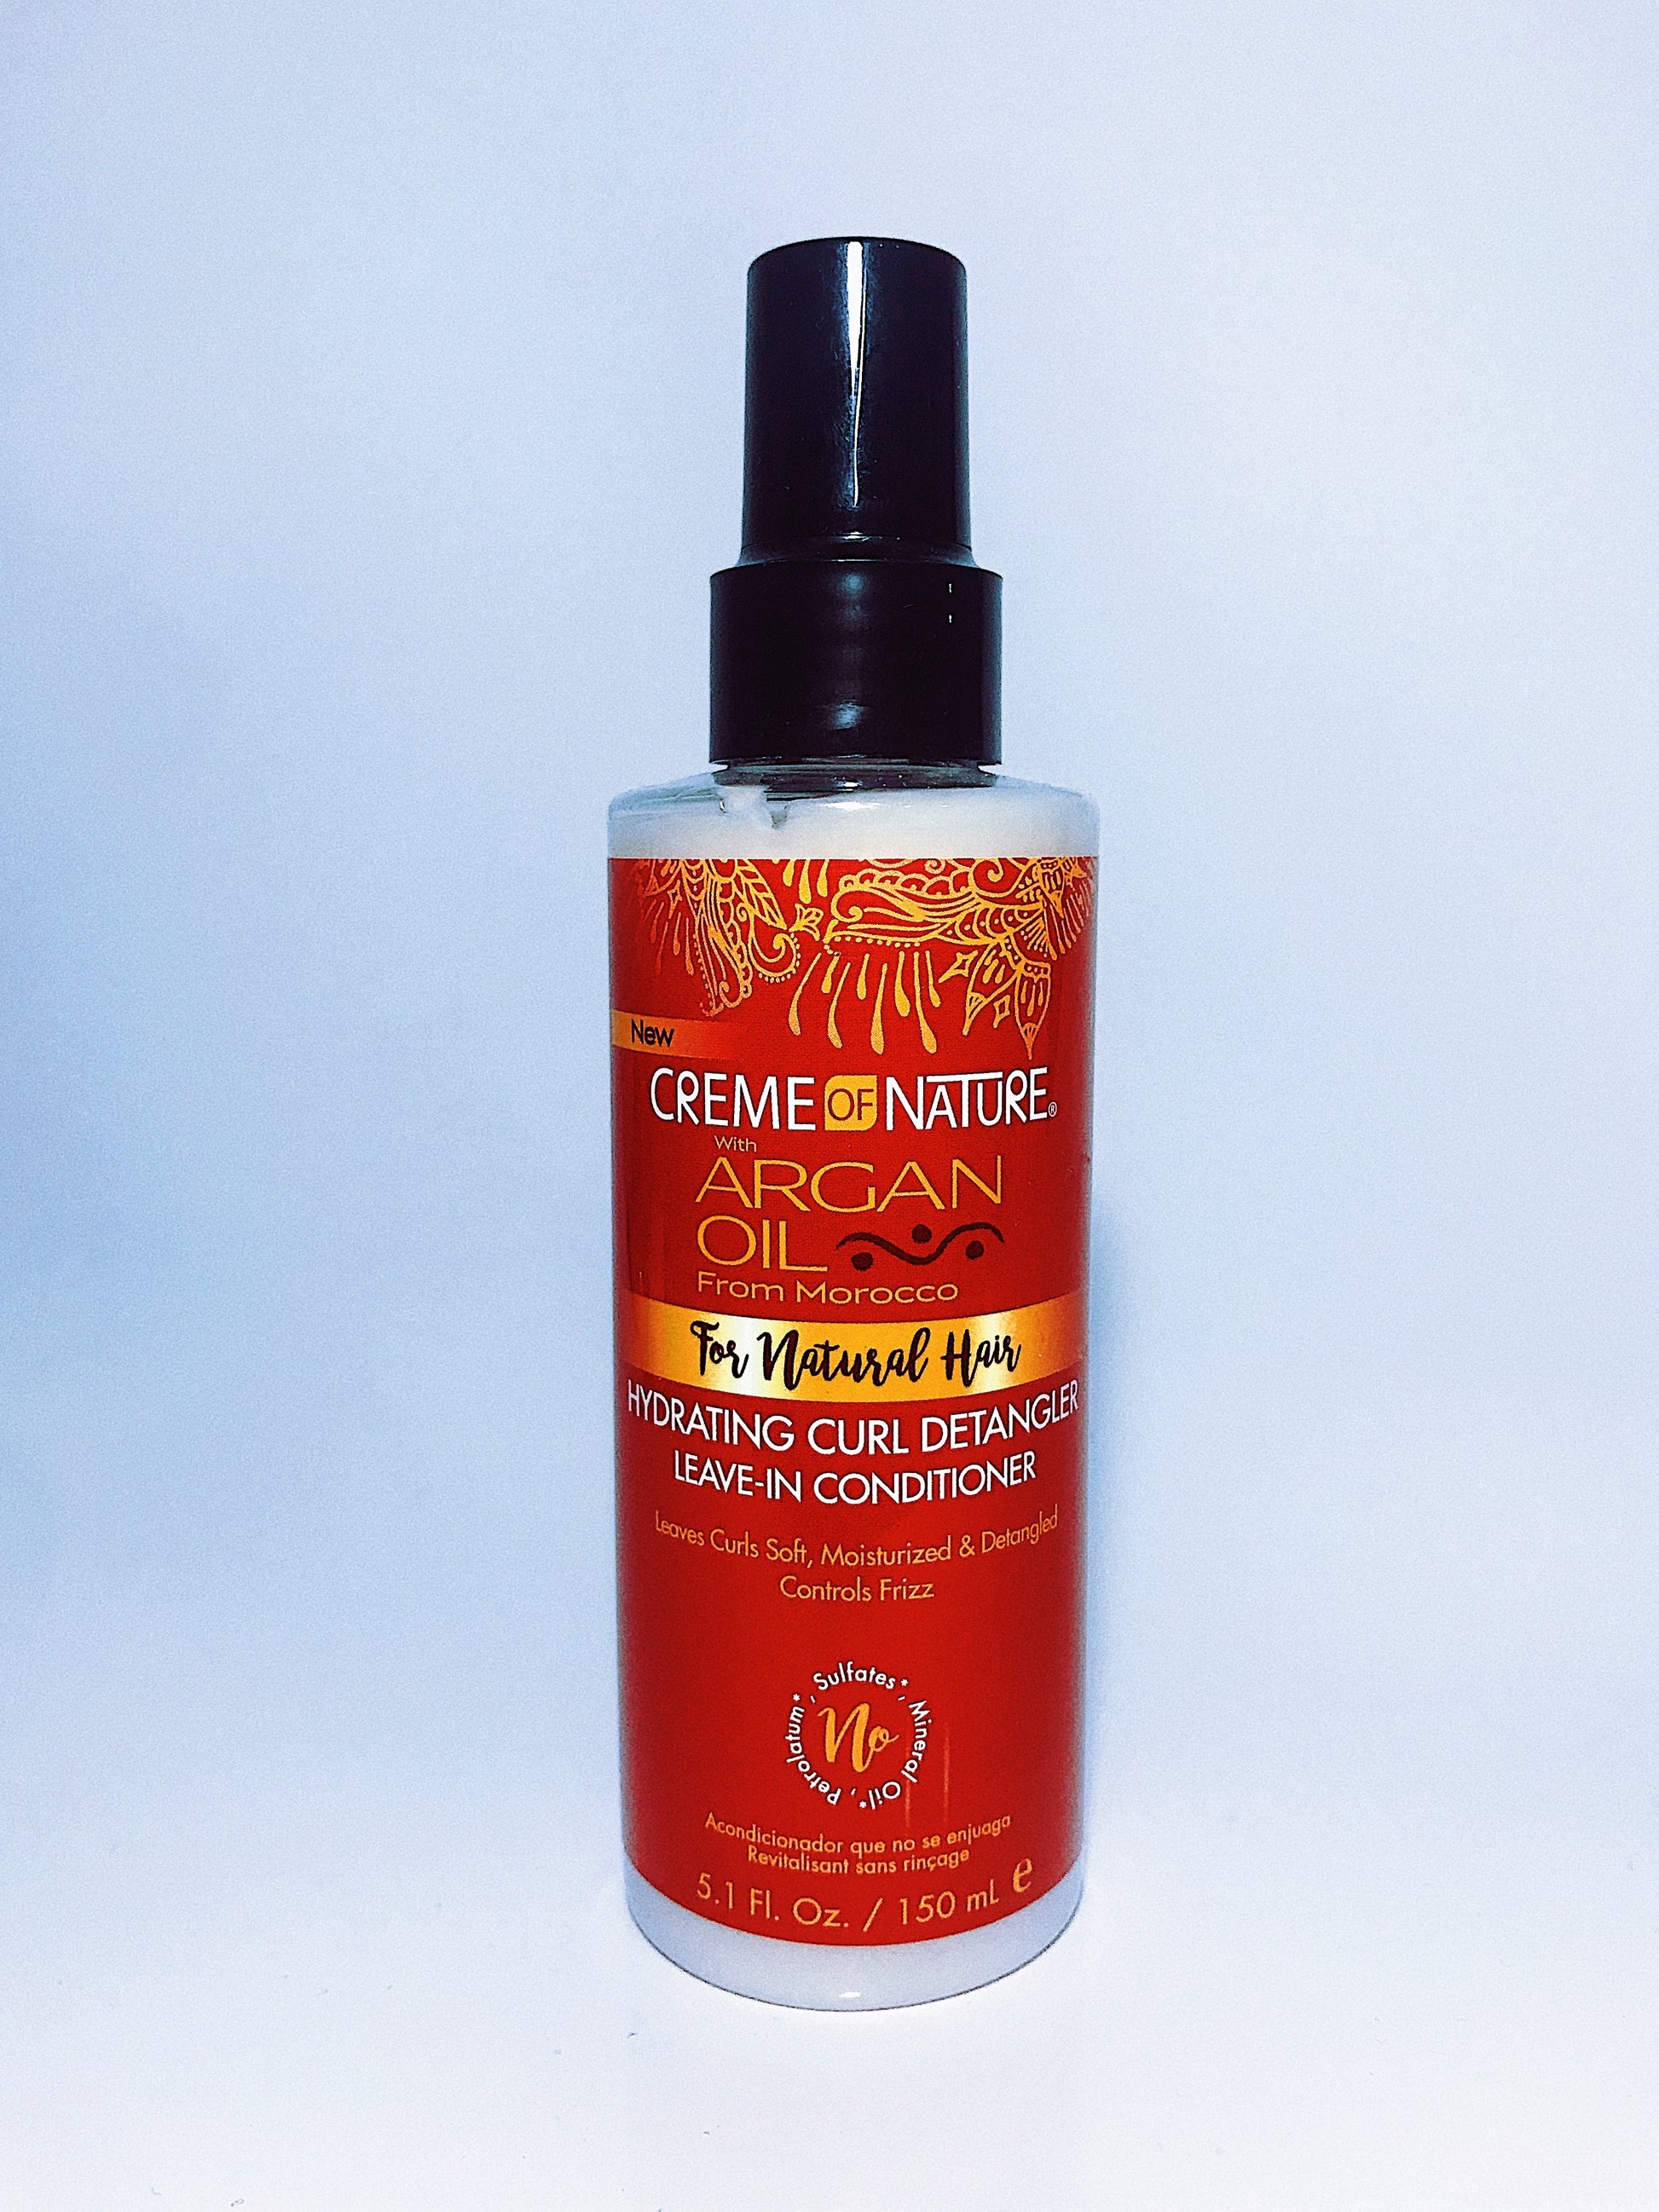 creme-of-nature-hydrating-curl-detangler-leave-in-conditioner.jpg